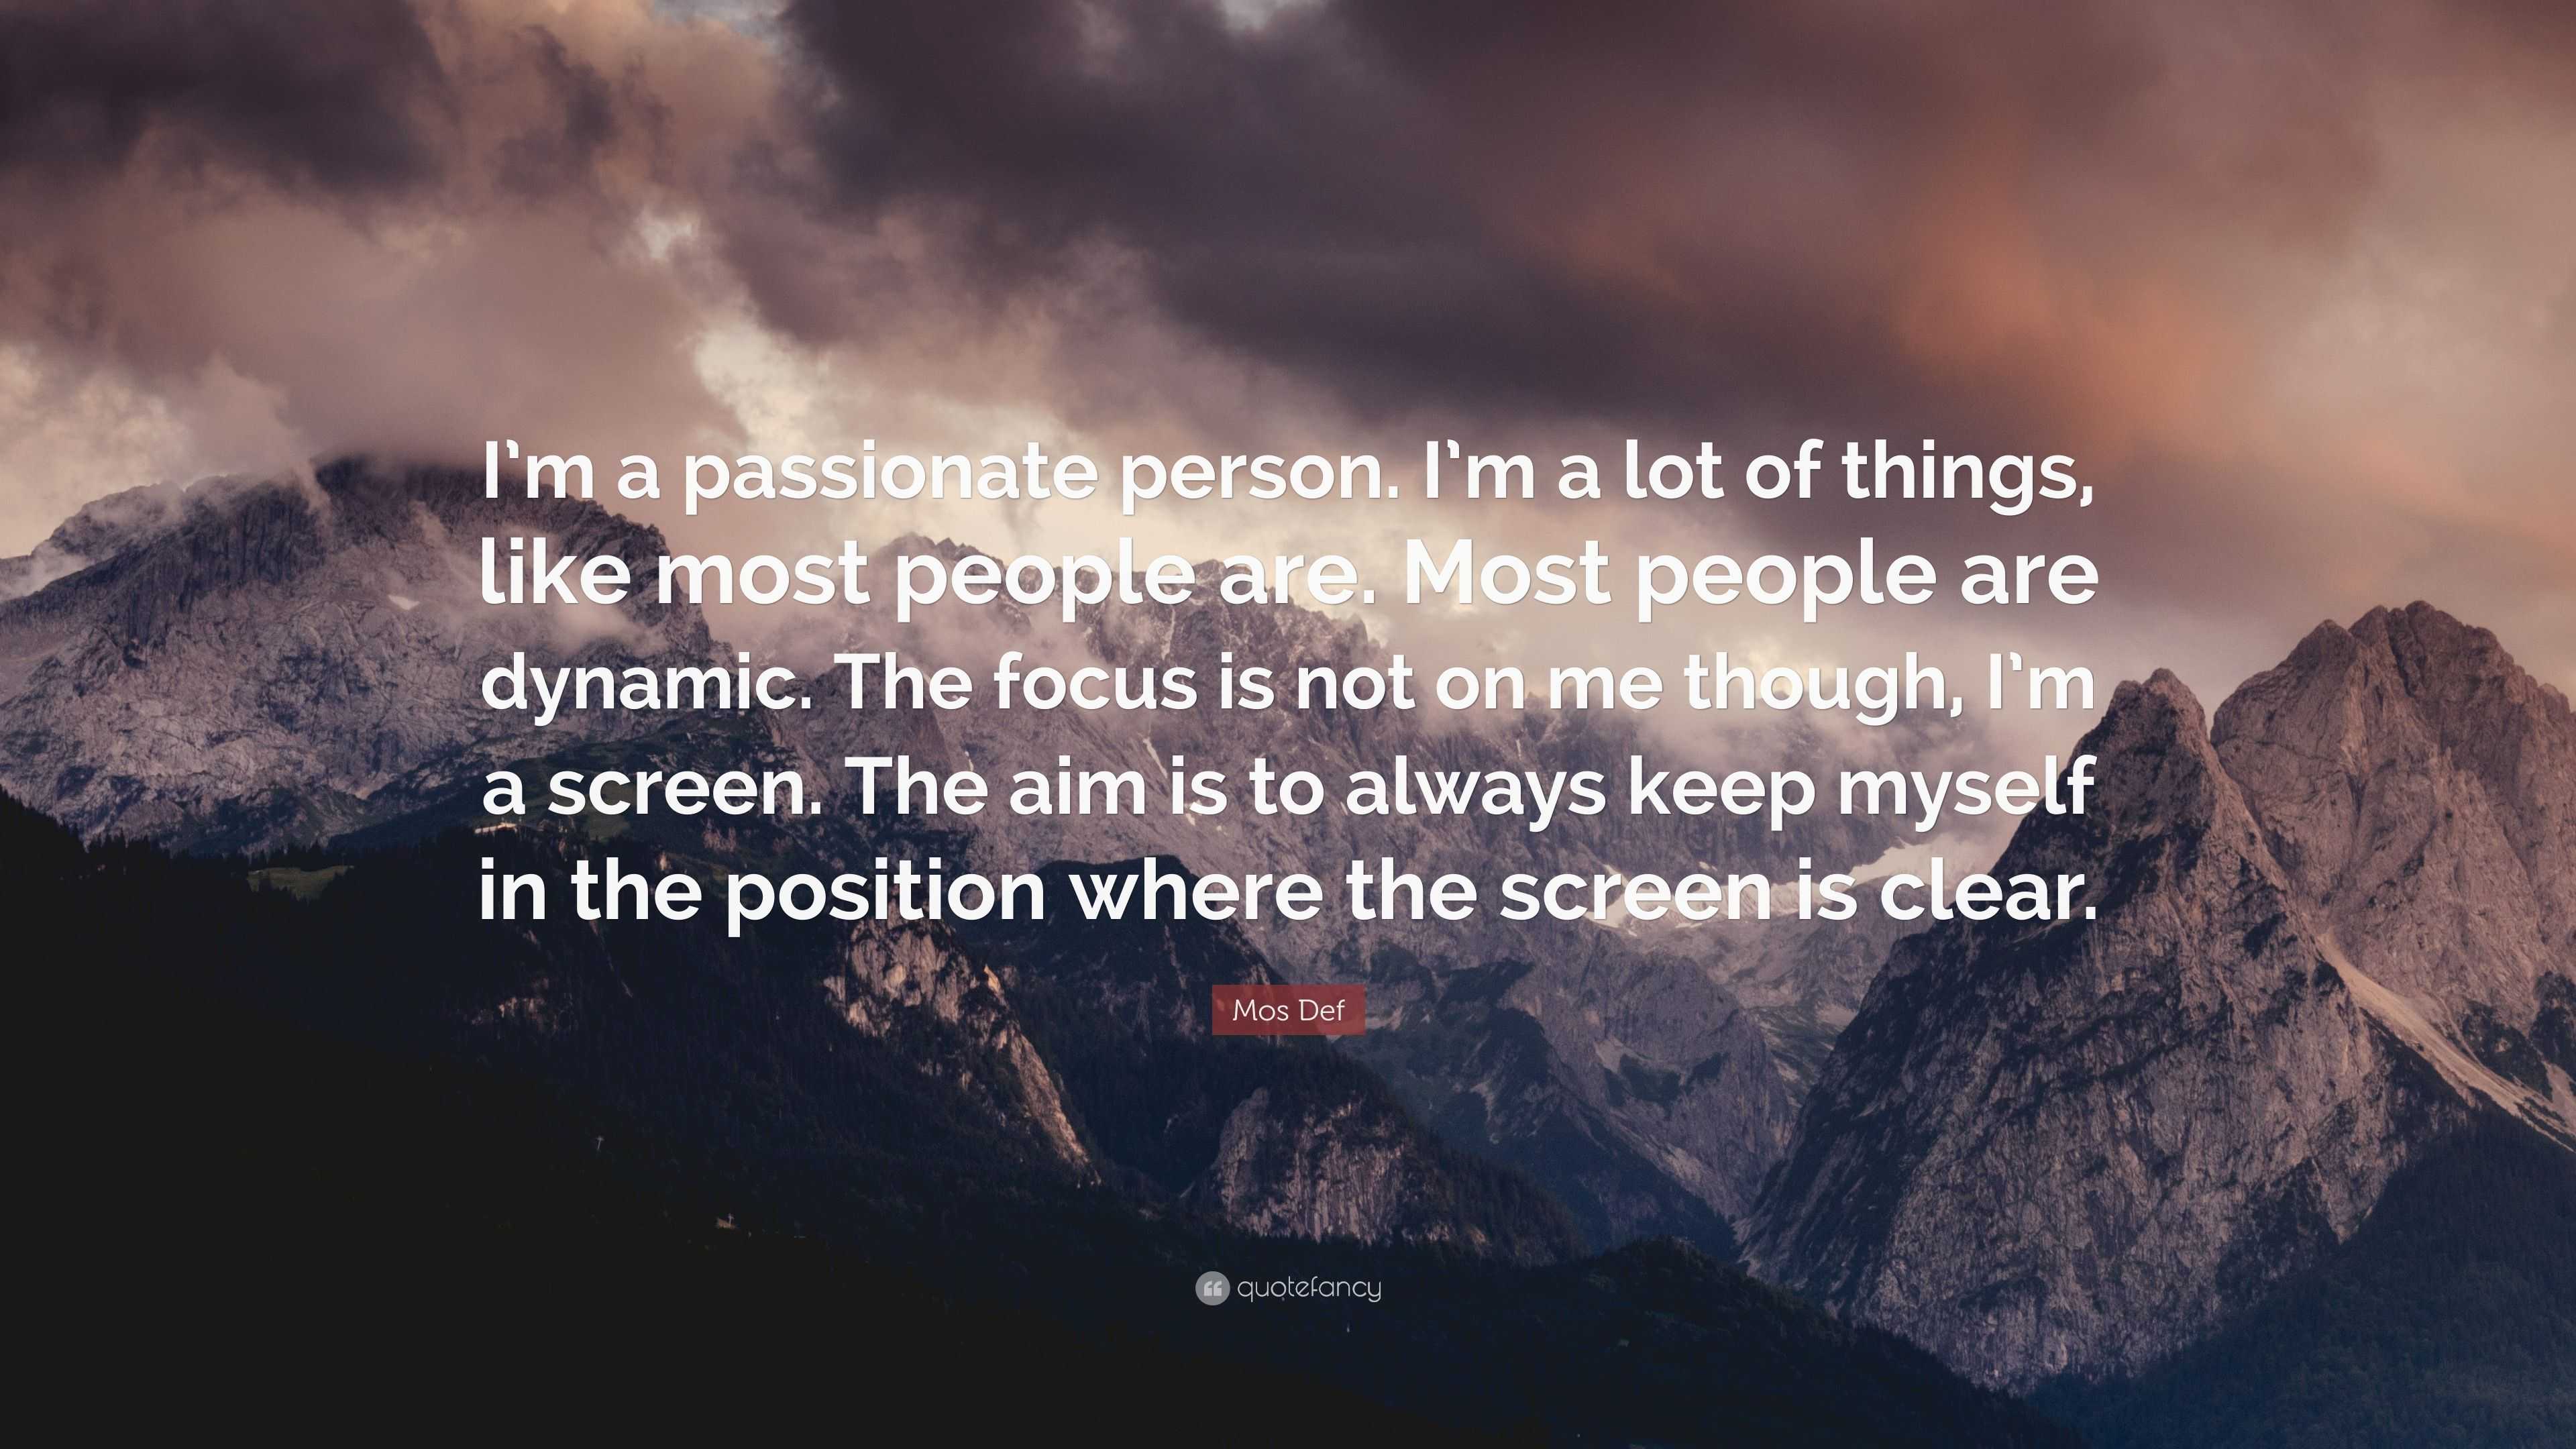 Mos Def Quote: “I’m a passionate person. I’m a lot of things, like most ...